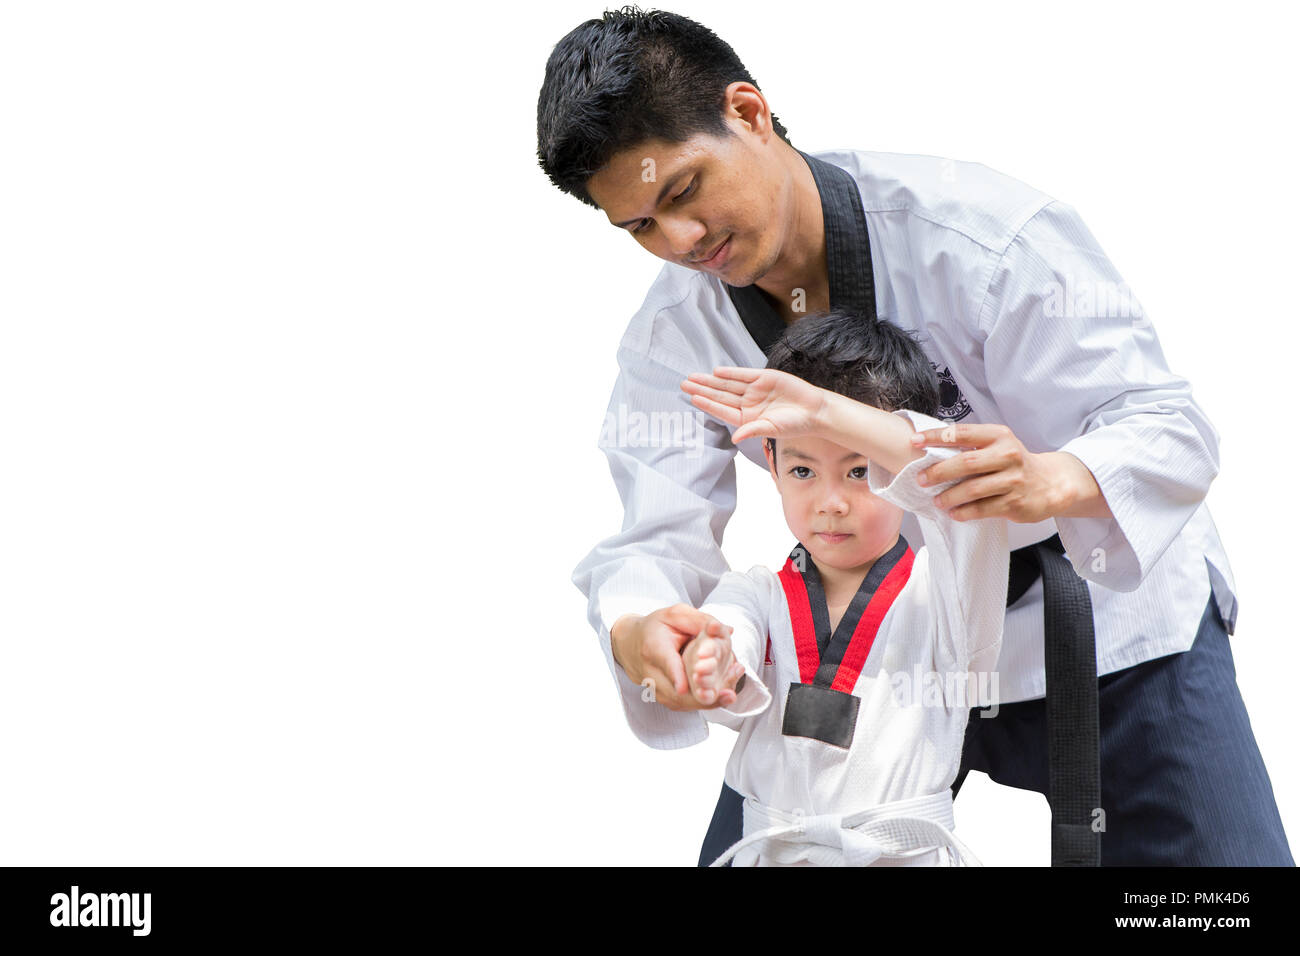 Teacher Black belt Taekwondo Fighter Kid Punch Guard Stand for Flight isolated on white background with clipping path Stock Photo